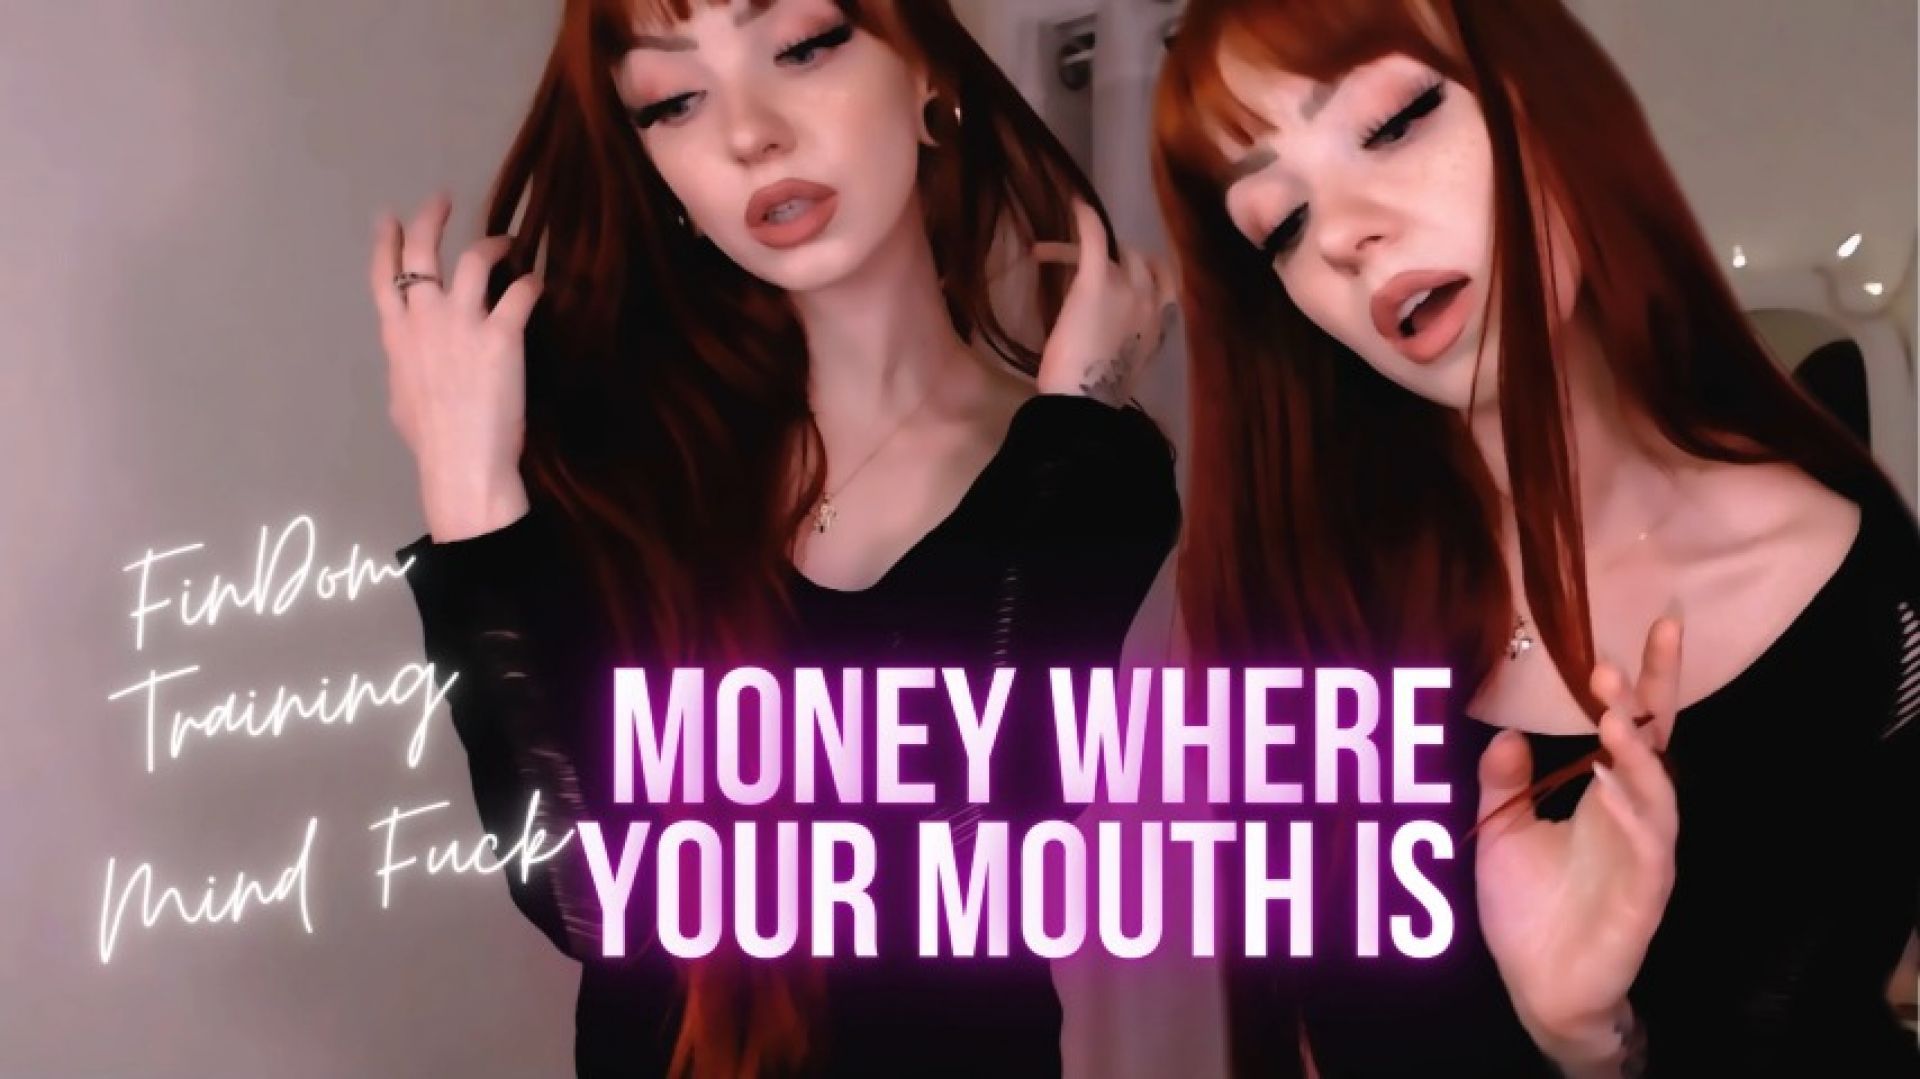 Money Where Your Mouth Is: FinDom Training/Mind Fuck